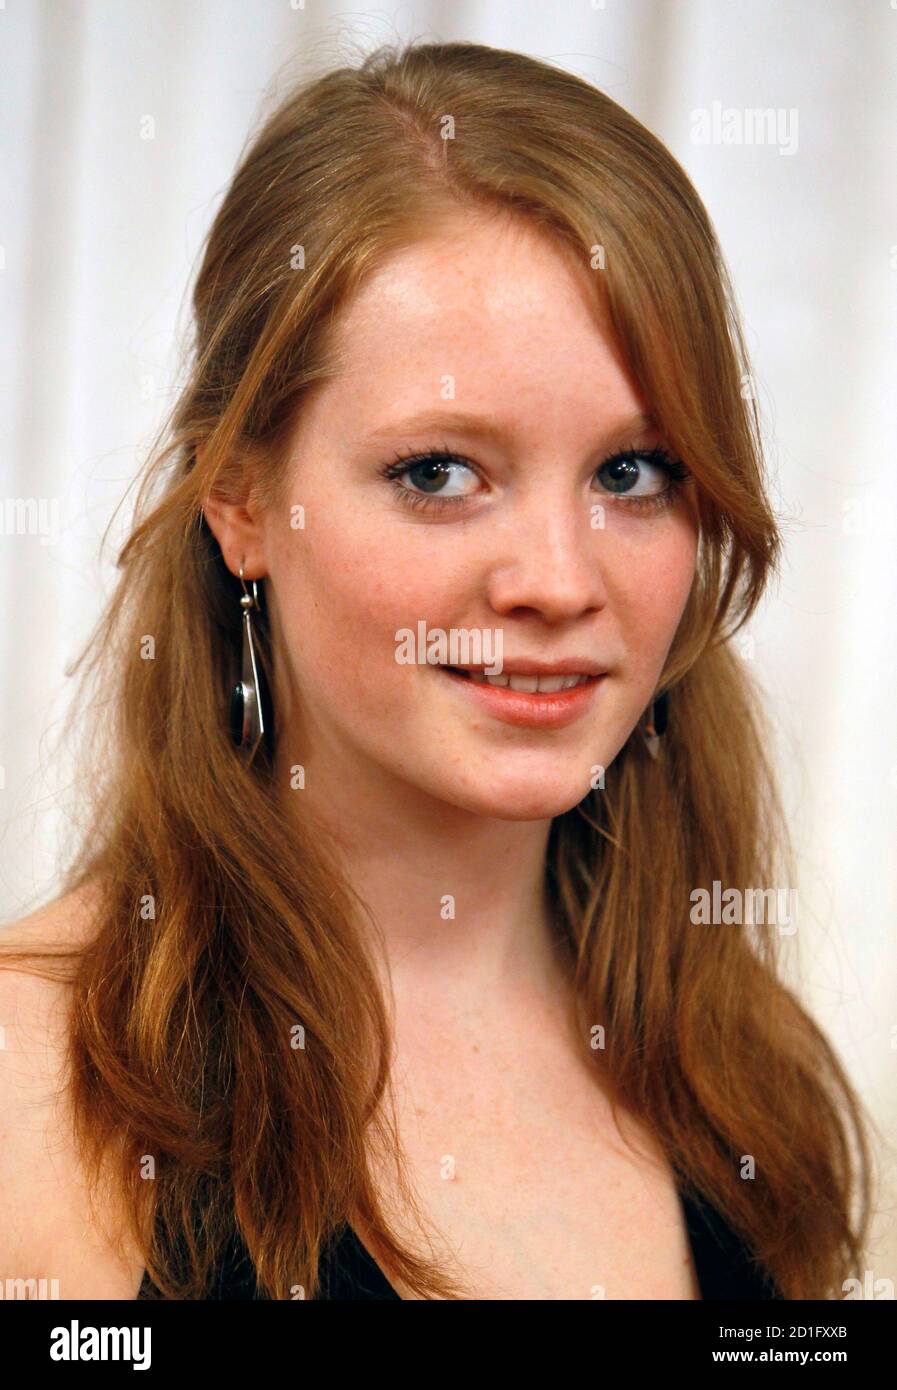 Actress Leonie Benesch, from the German film "The White Ribbon (Das Weisse Band)" which is nominated for a best foreign language film award, poses for photographers ahead of the 82nd Academy Awards in Hollywood, March 5, 2010.  REUTERS/Brian Snyder  (UNITED STATES - Tags: ENTERTAINMENT) Stock Photo